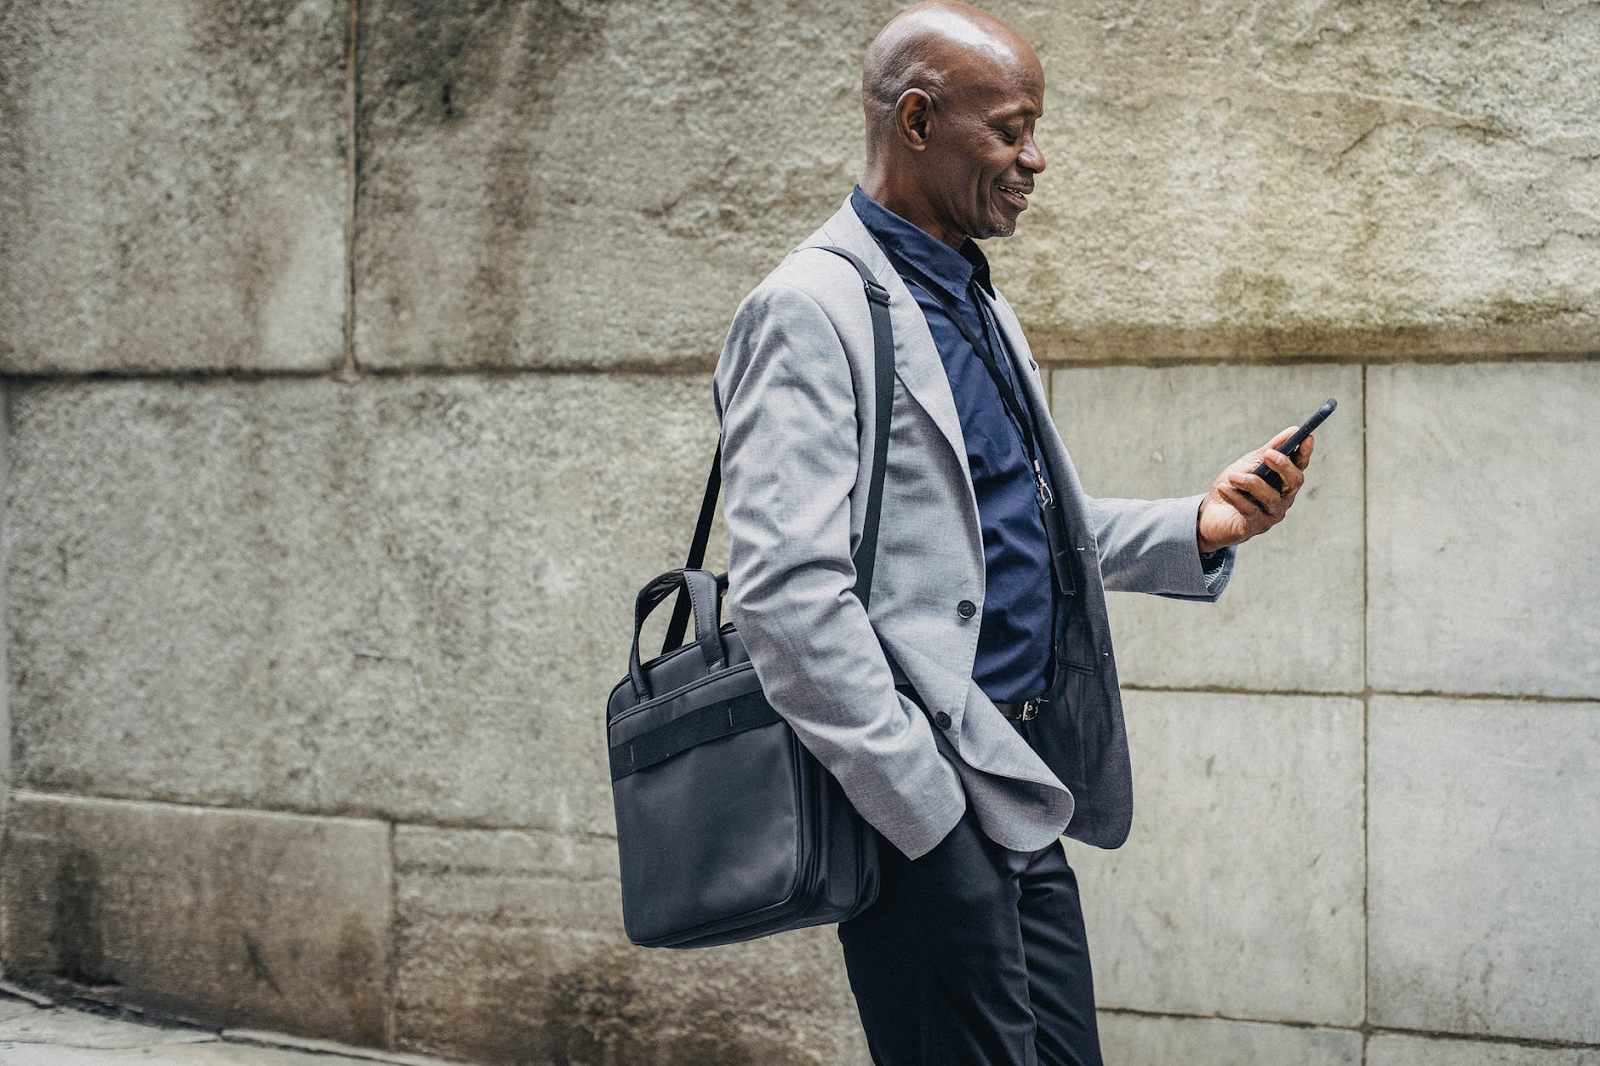 Cheerful black manager looking at smartphone while walking down street